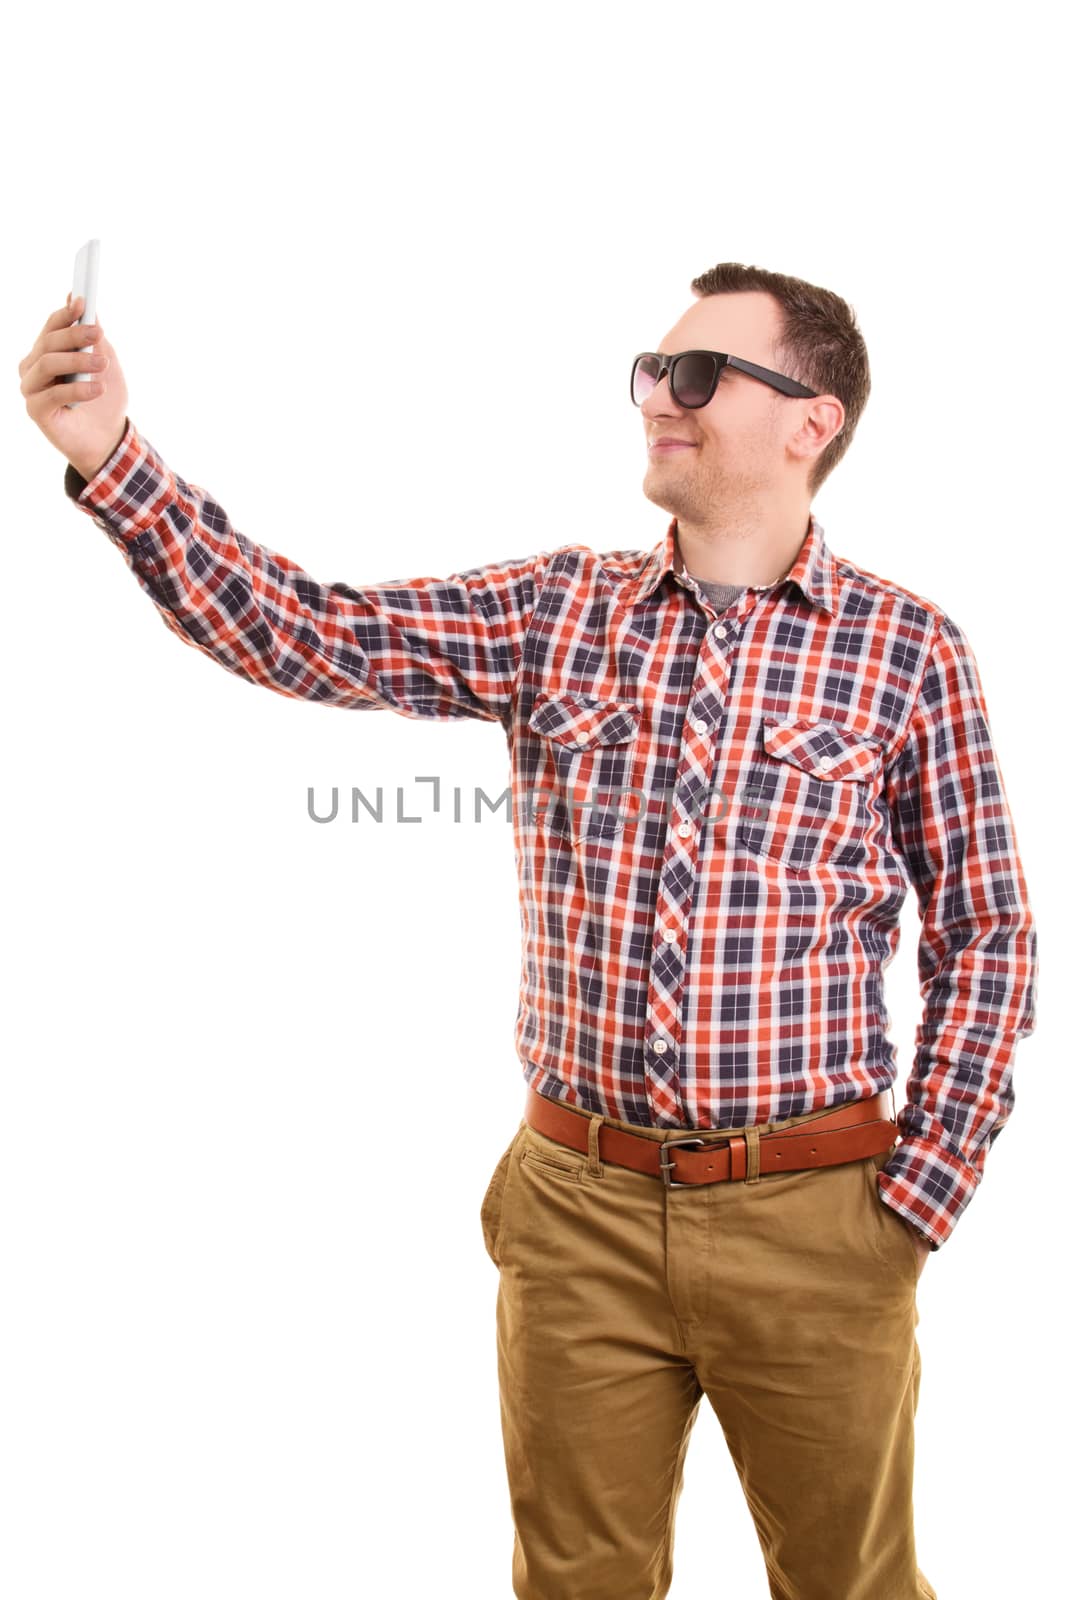 A portrait of a young fashionable man taking a selfie, isolated on white background.